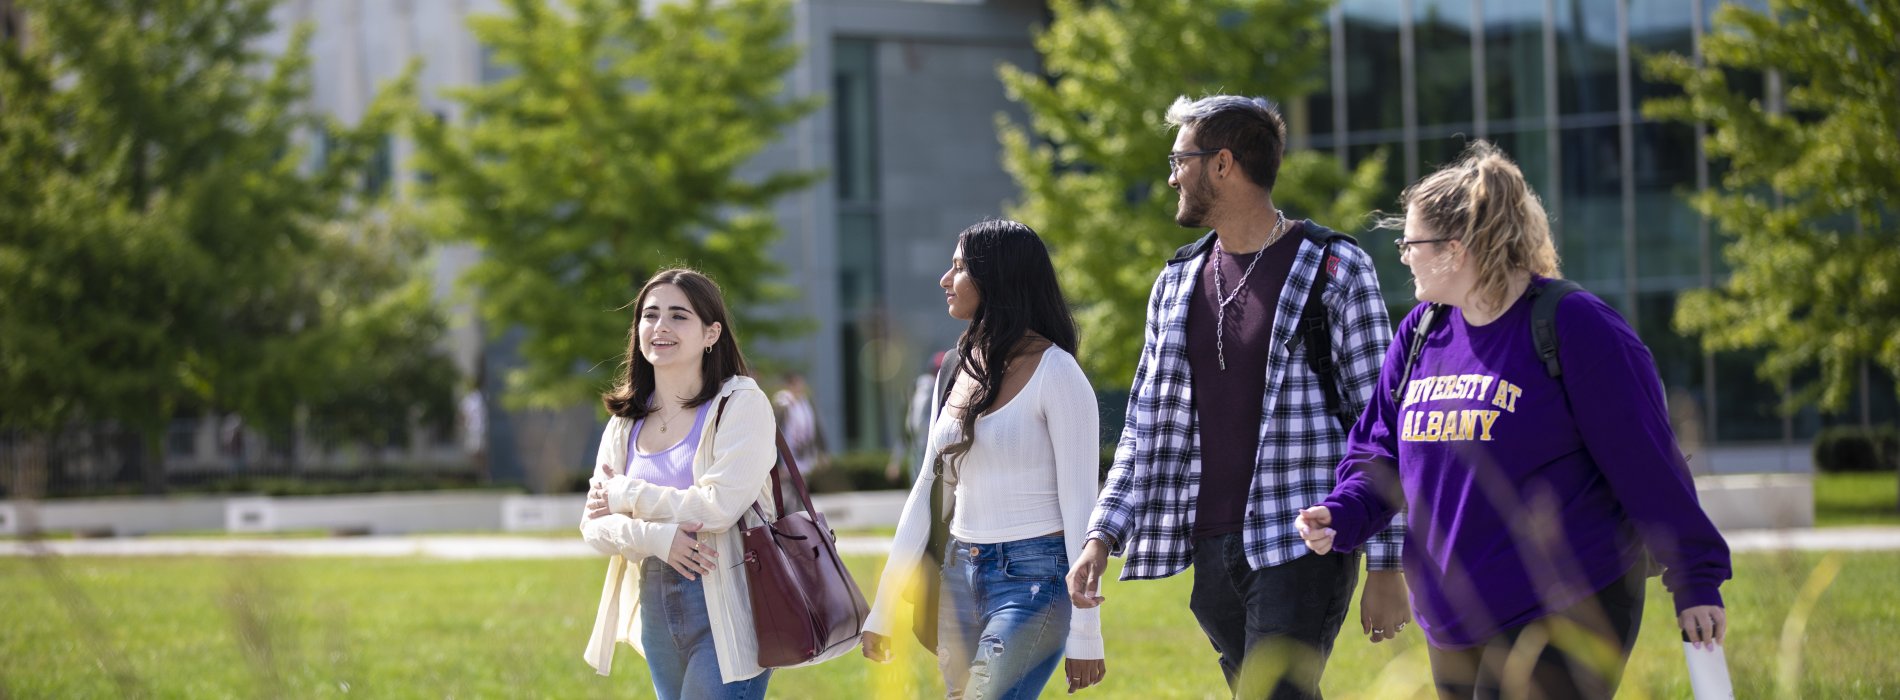 UAlbany students walk in a group together on campus during a beautiful sunny day